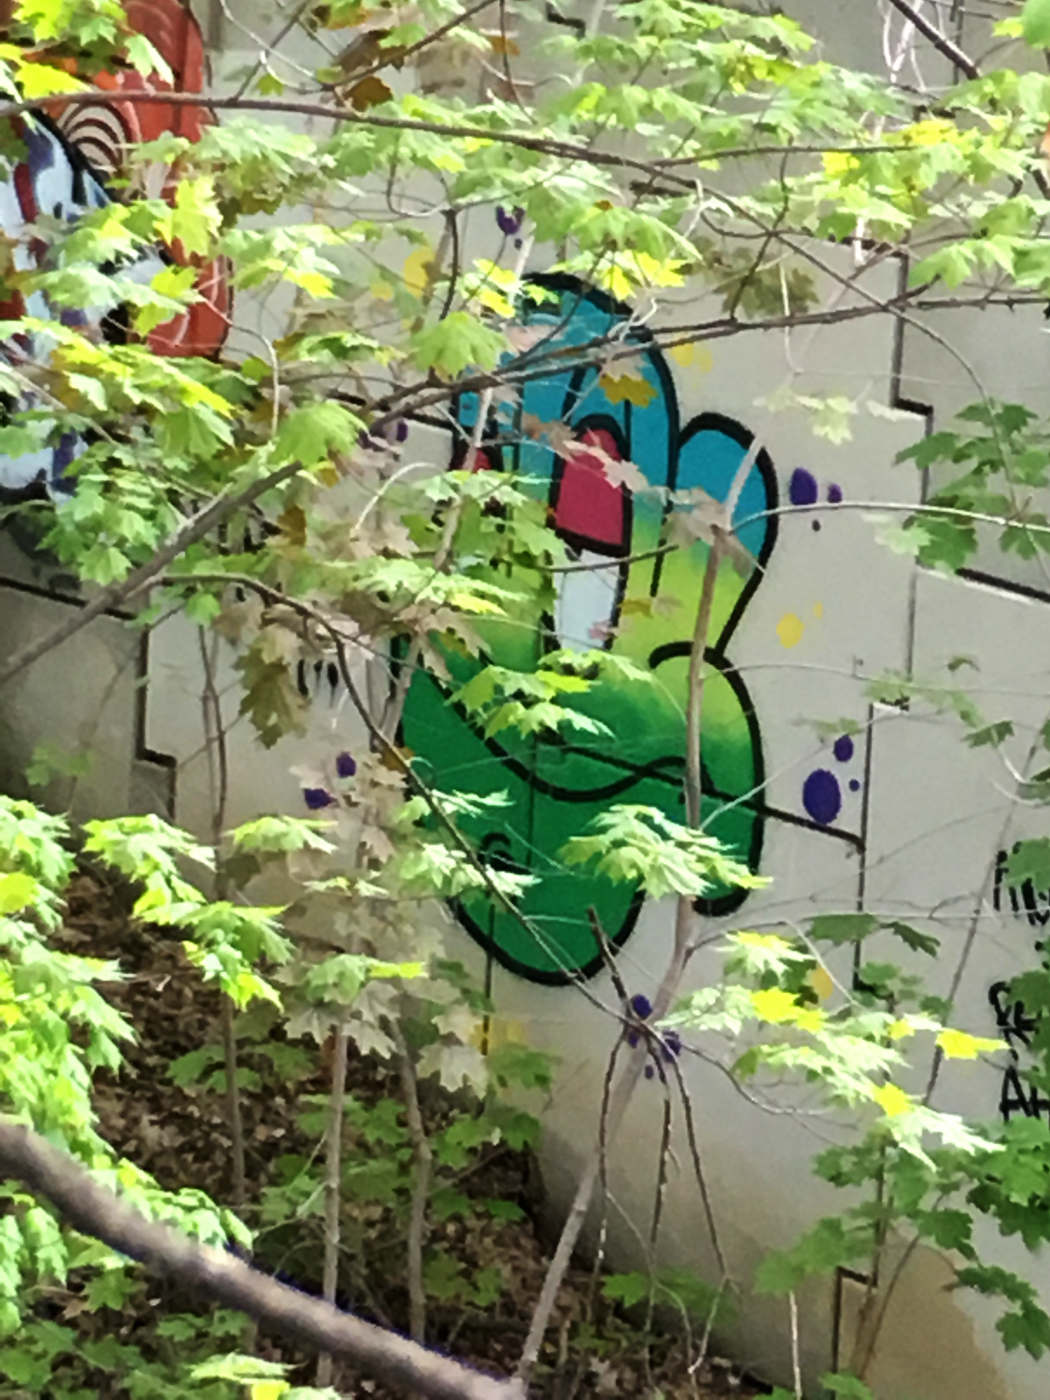 Cartoon faces painted on white wall with green brush in foreground